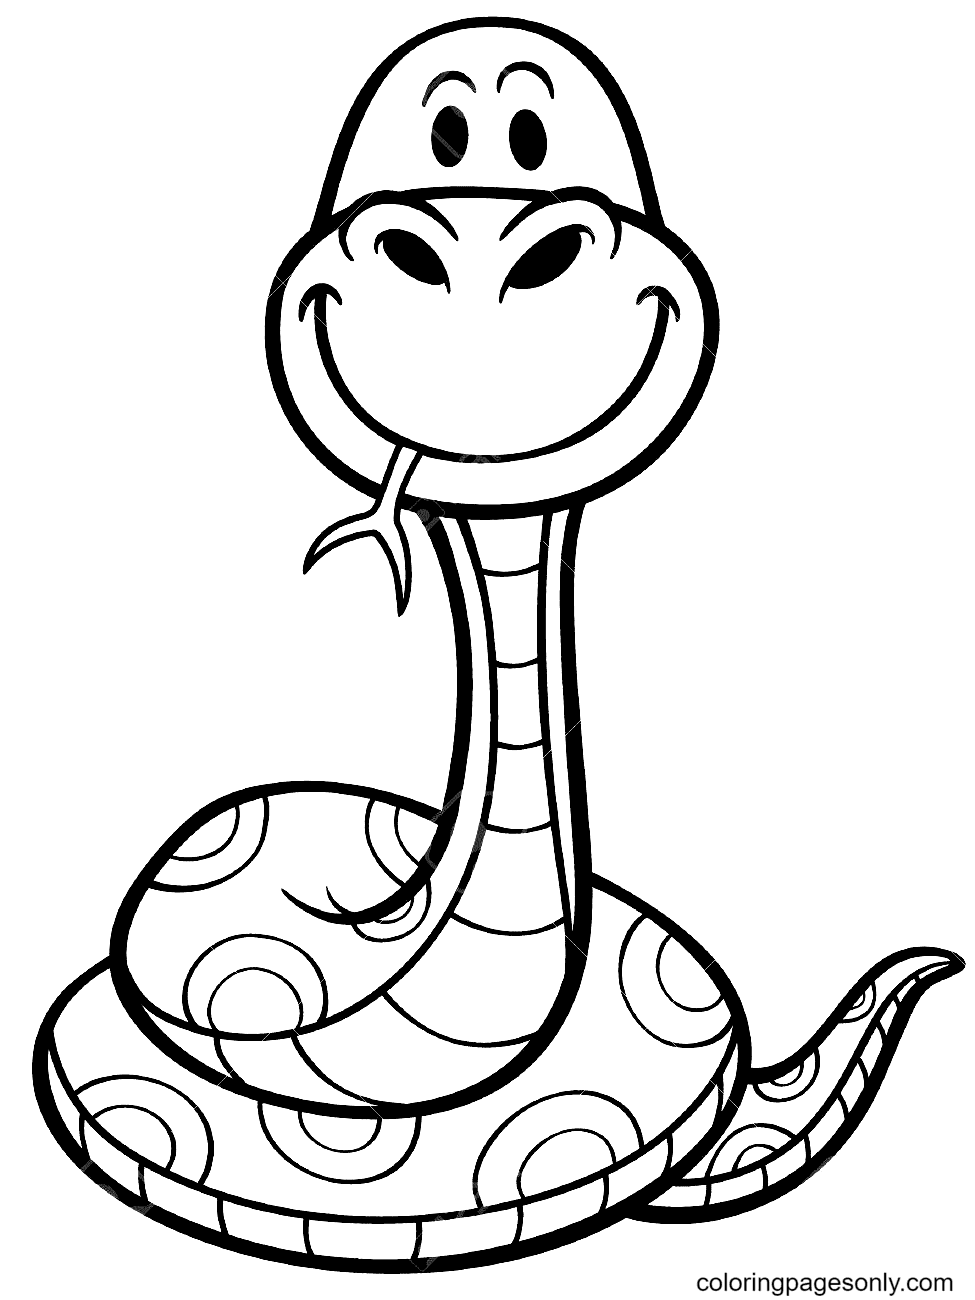 Cute Snake Printable Coloring Page